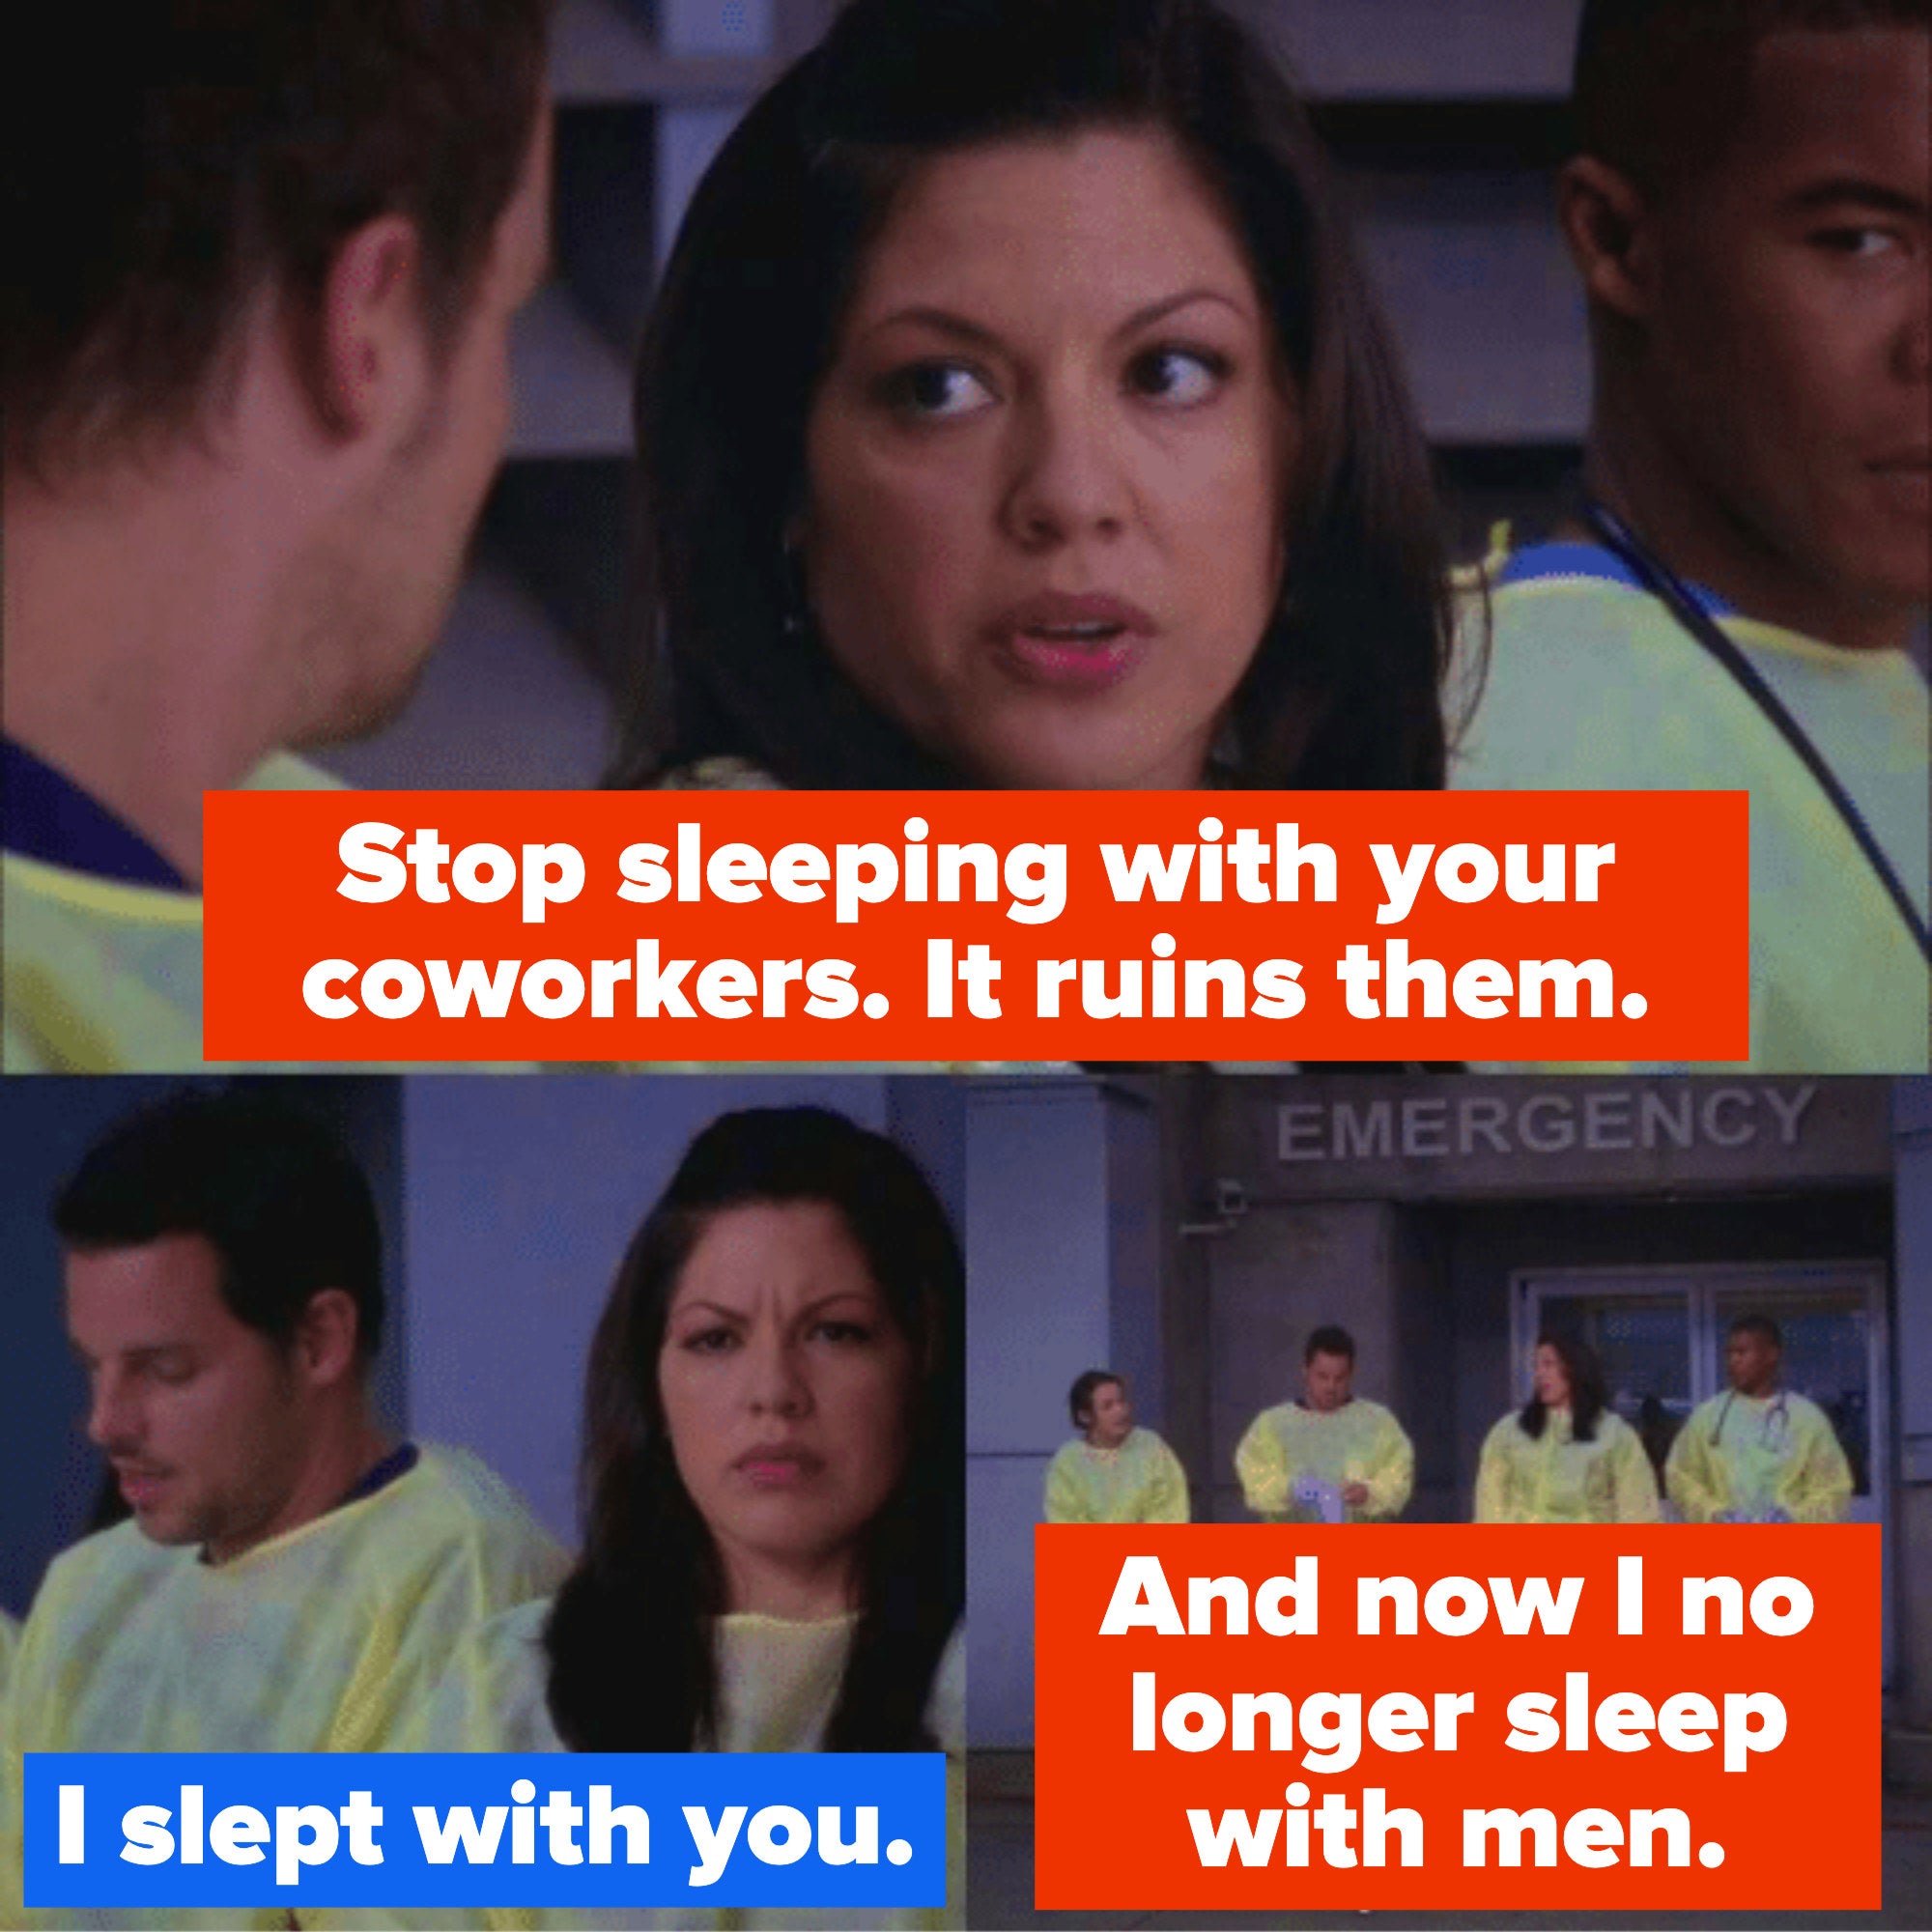 Callie telling Alex, &quot;Stop sleeping with your c oworkers, it ruins them,&quot; and Alex responding &quot;I slept with you&quot; to which Callie responds, &quot;And now I no longer sleep with men&quot;